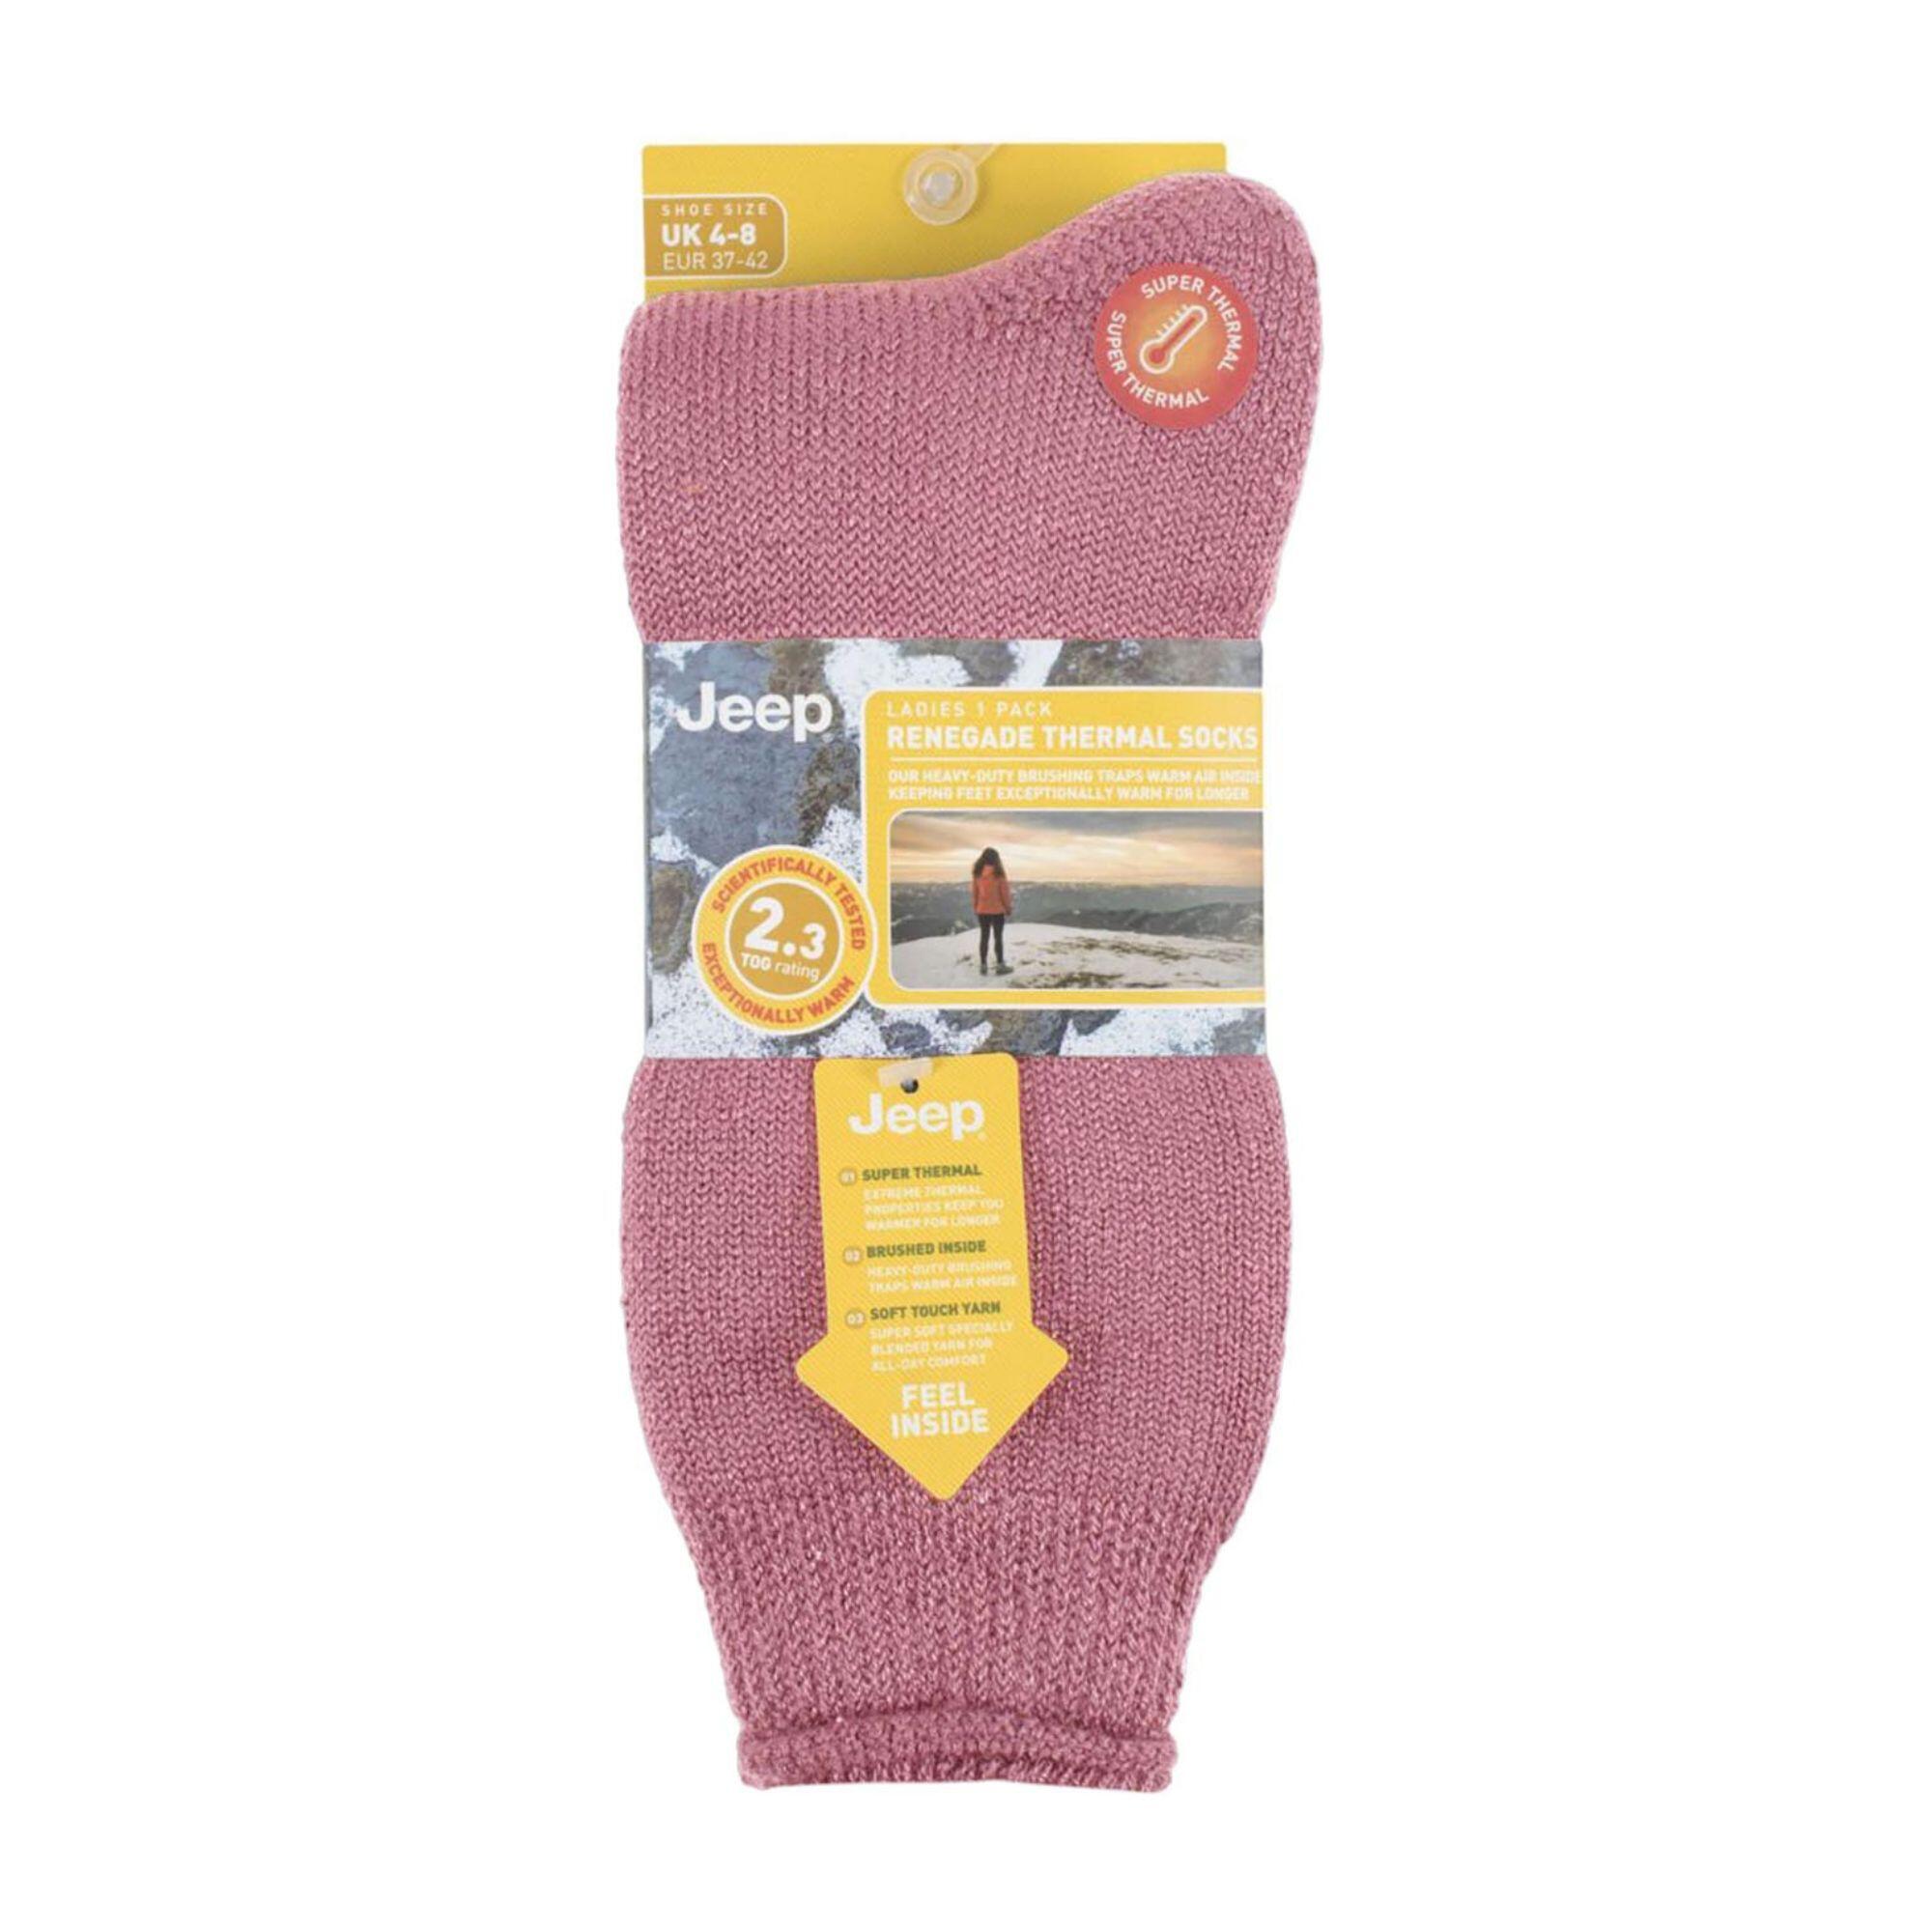 Ladies Thermal Breathable Luxury Cushioned Winter Boot Socks 2/3